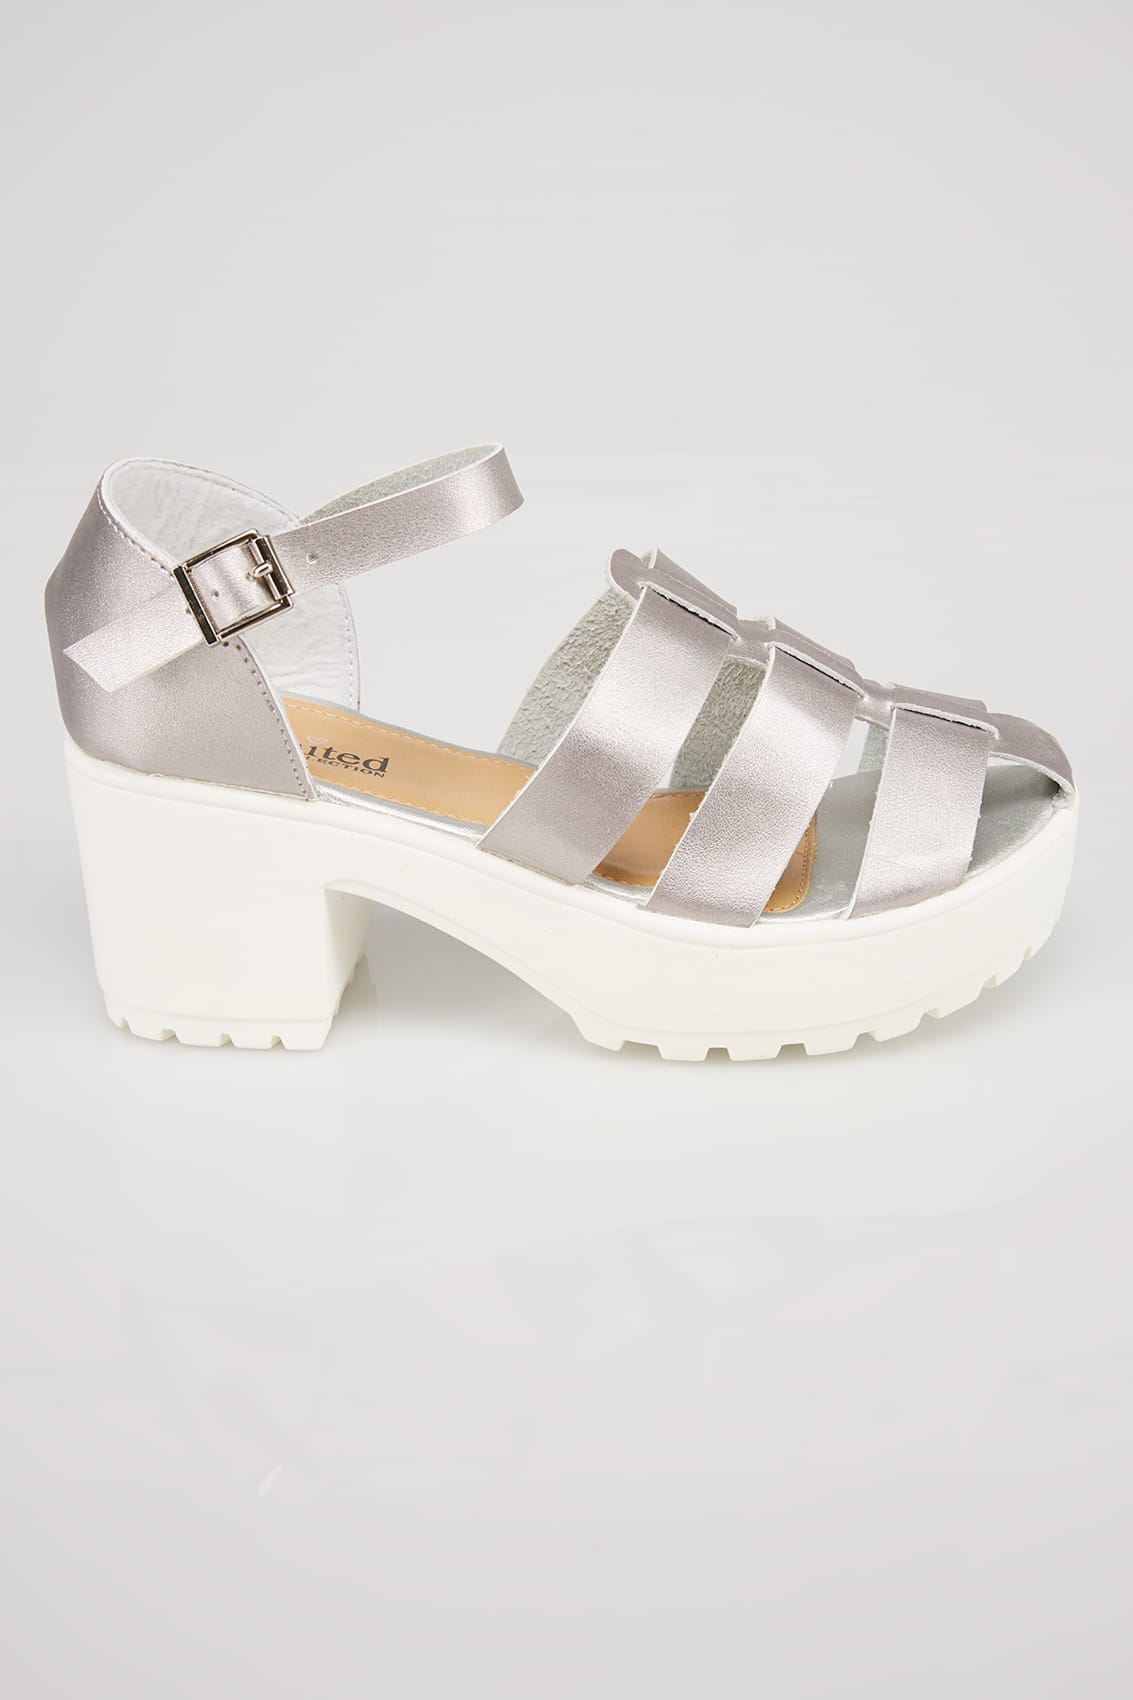 Silver & White Platform Gladiator Sandals In E Fit size 4,5,6,7,8,9